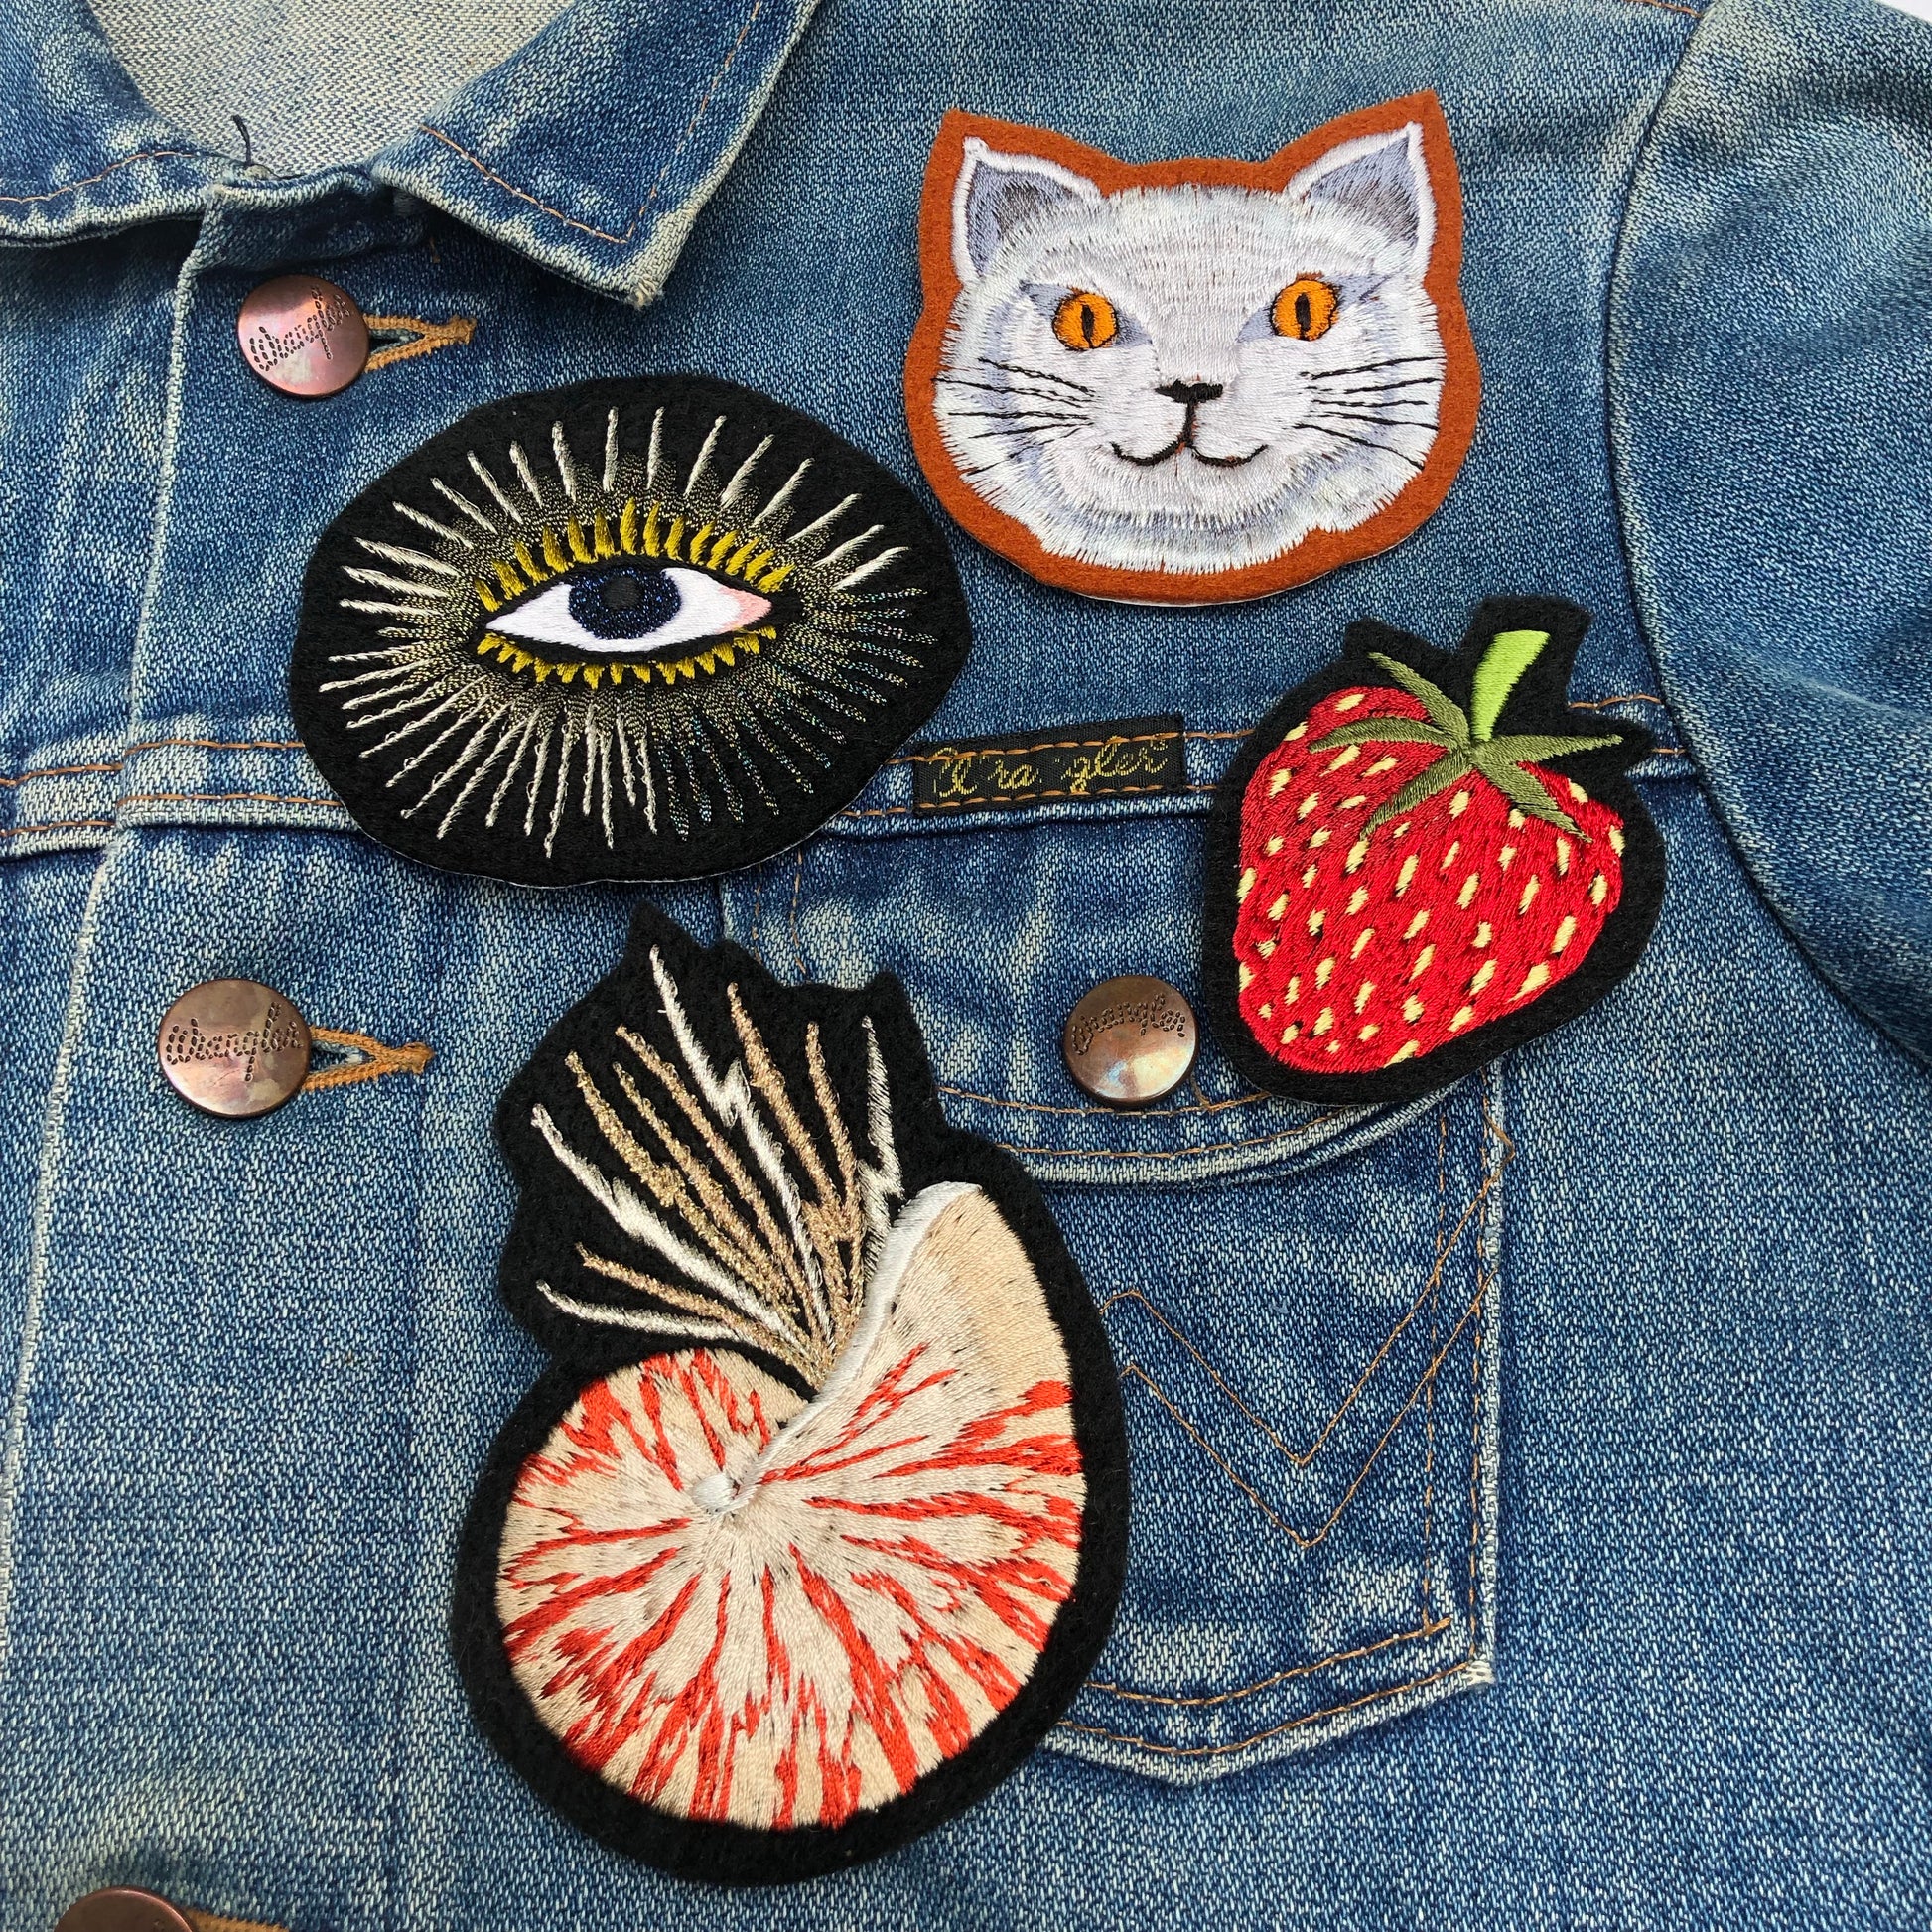 Selection of Ellie Mac Embroidery patches on a denim jacket including fat cat, metallic eye, strawberry and nautilus patches